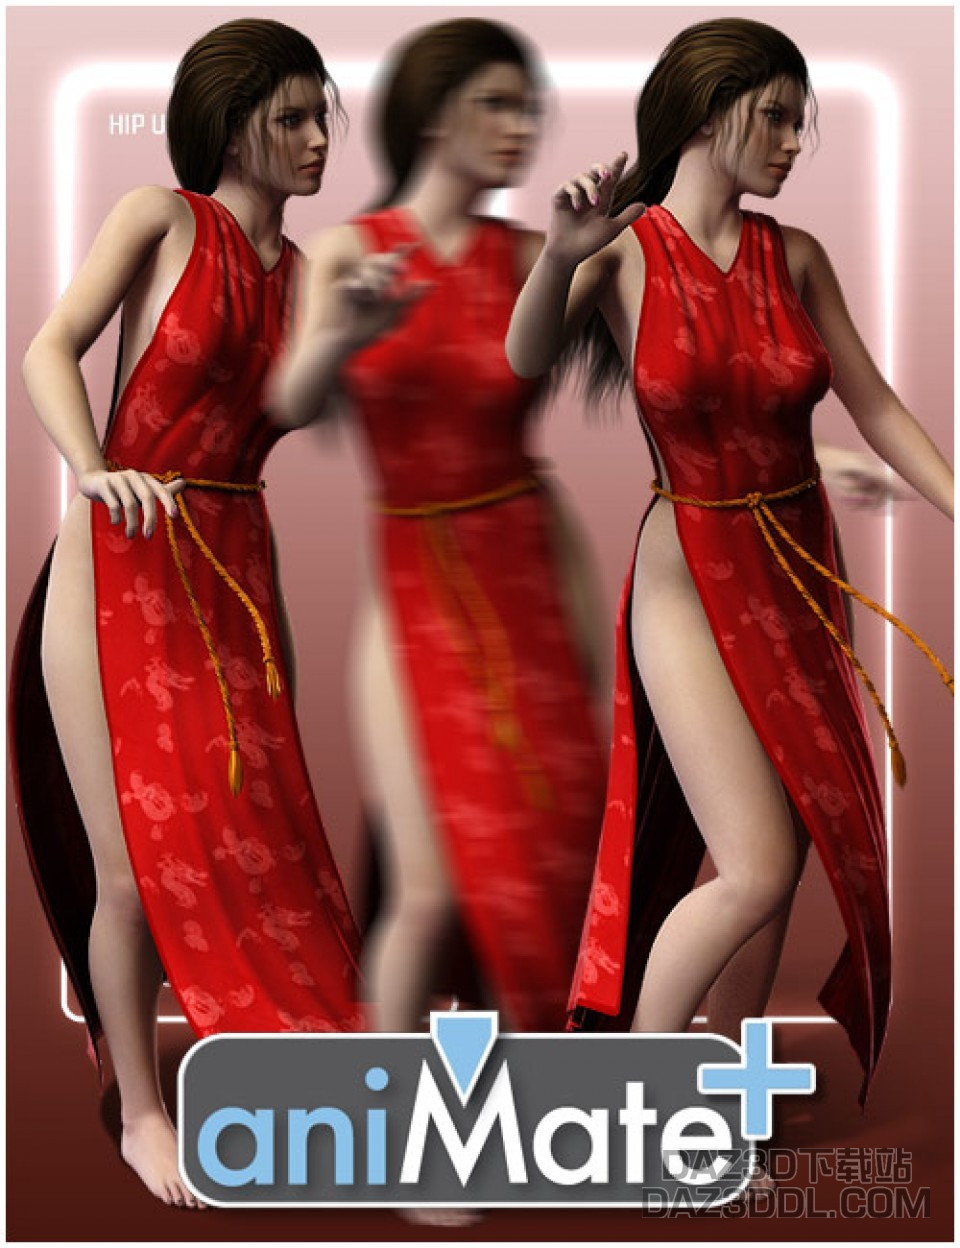 00-main-animate-belly-dancing-for-victoria-8-daz3d.jpg